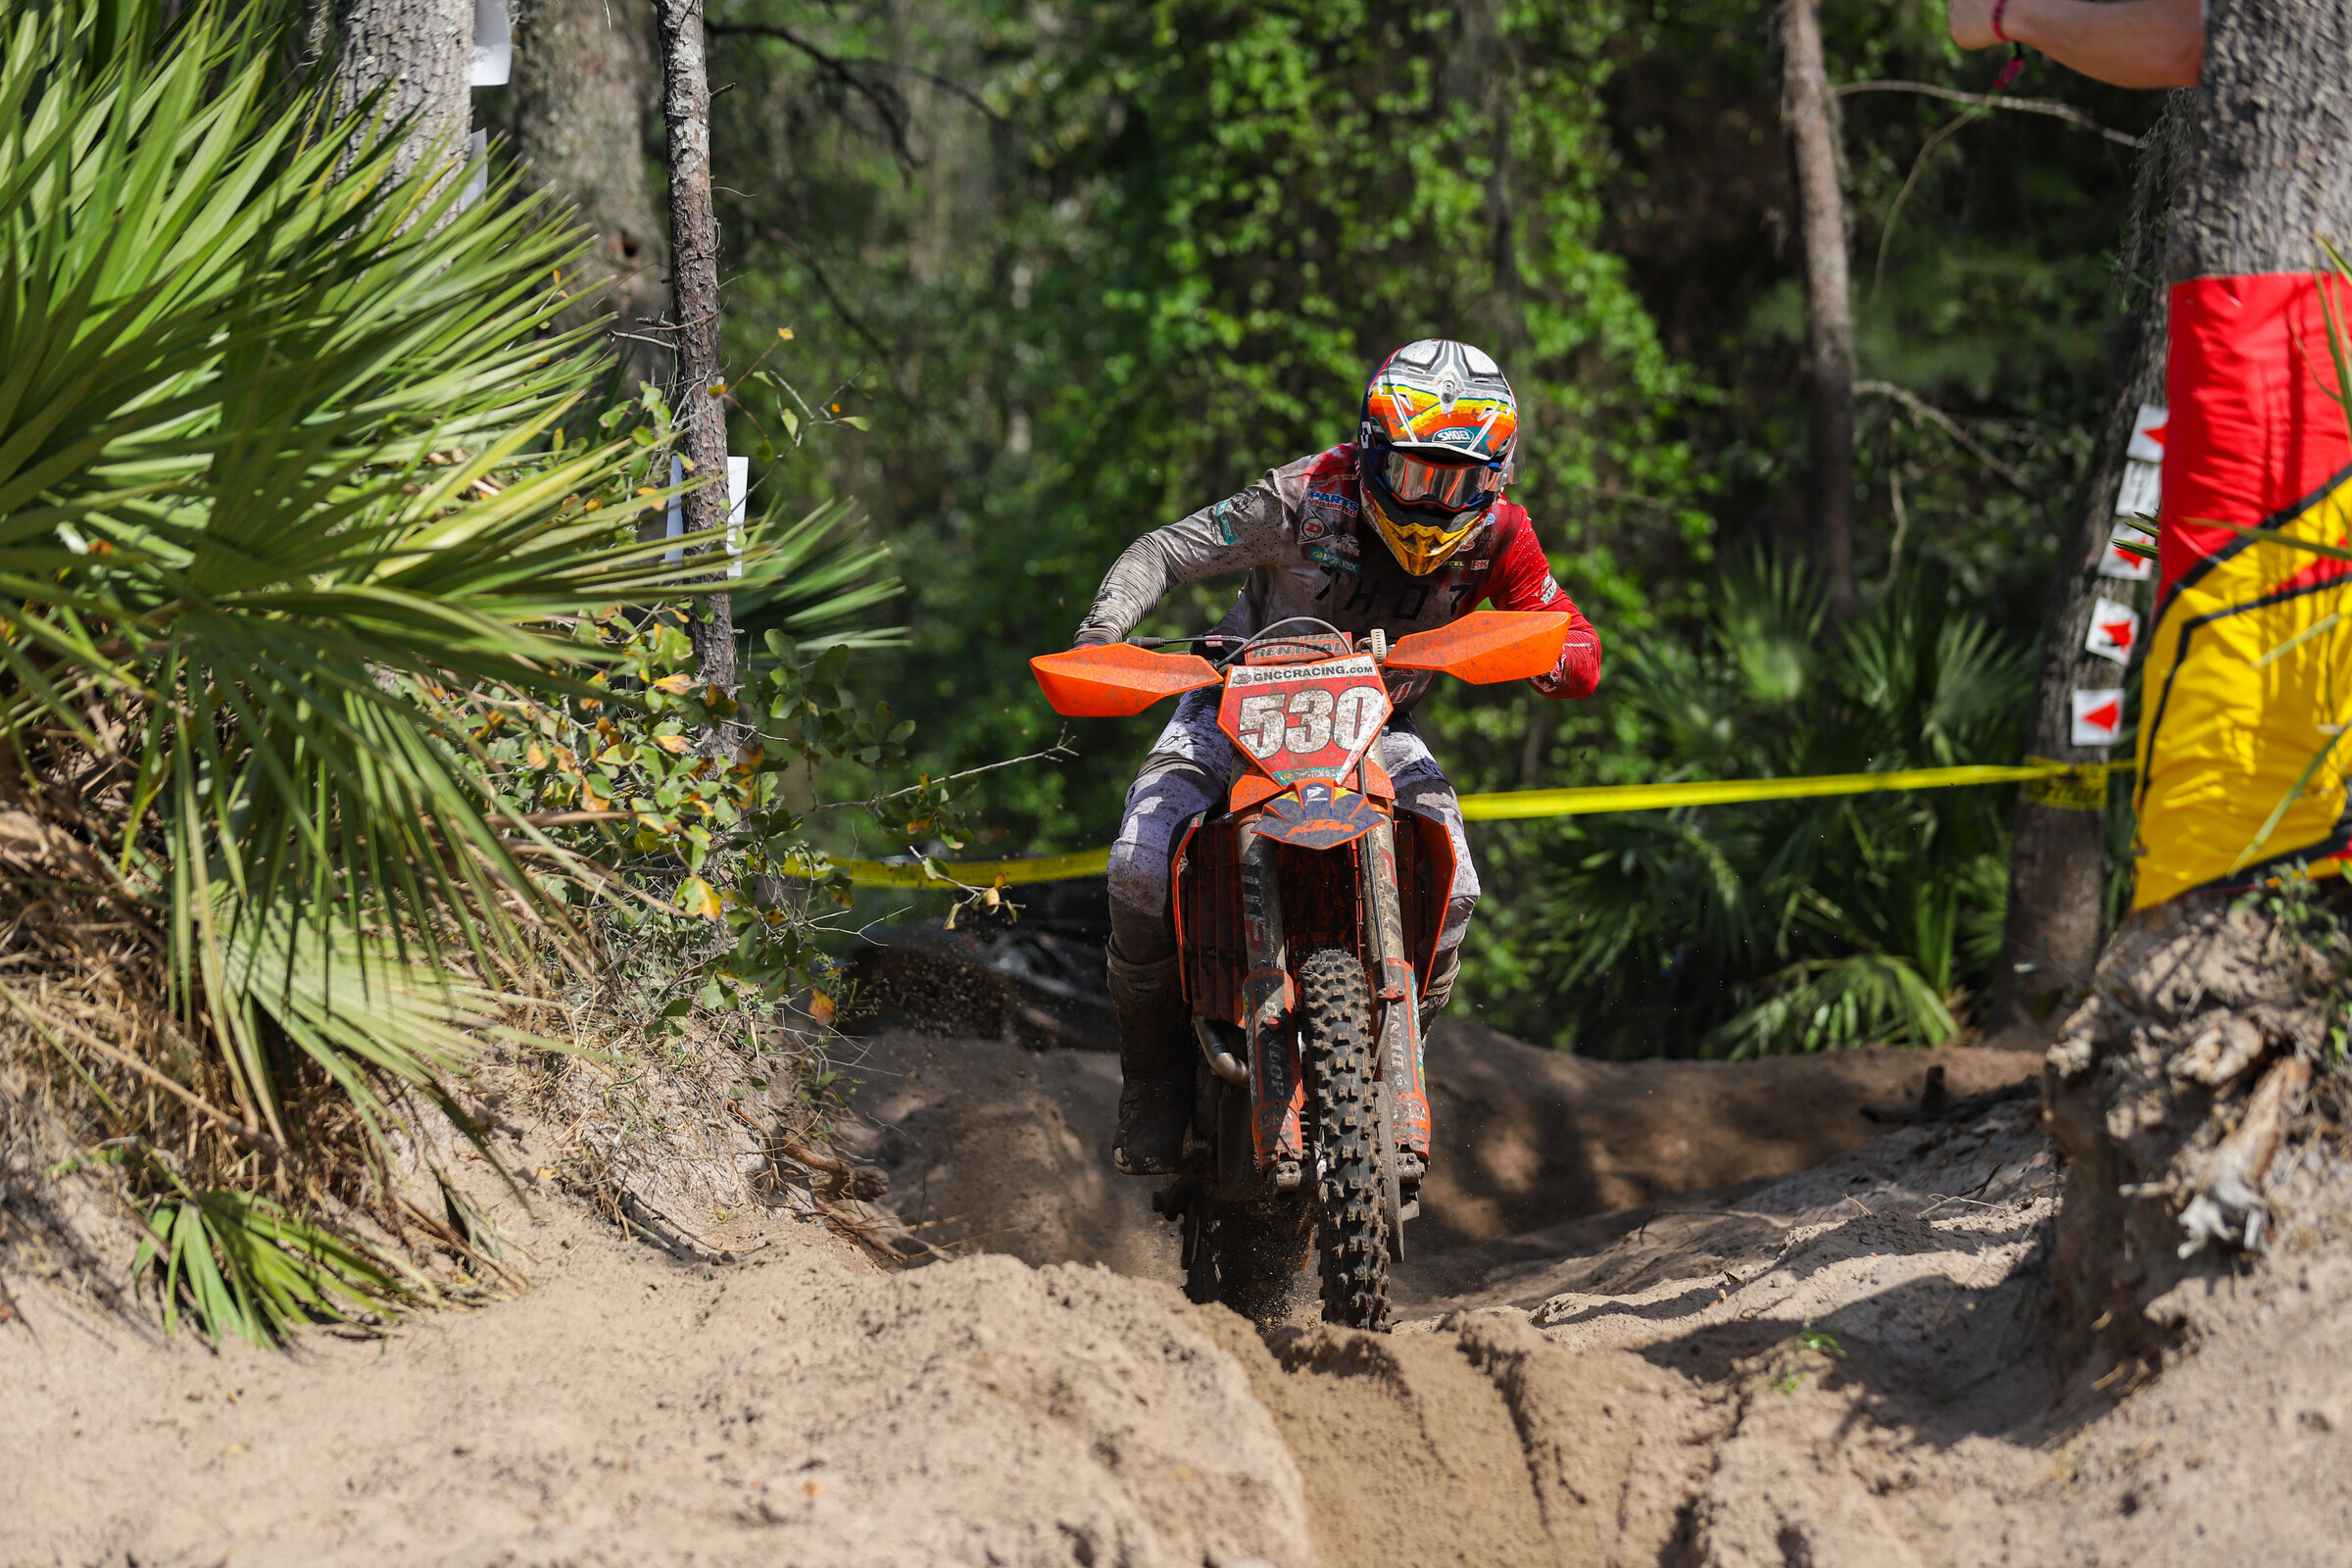 Ben Kelley Claims Wild Boar GNCC Overall Win in Florida